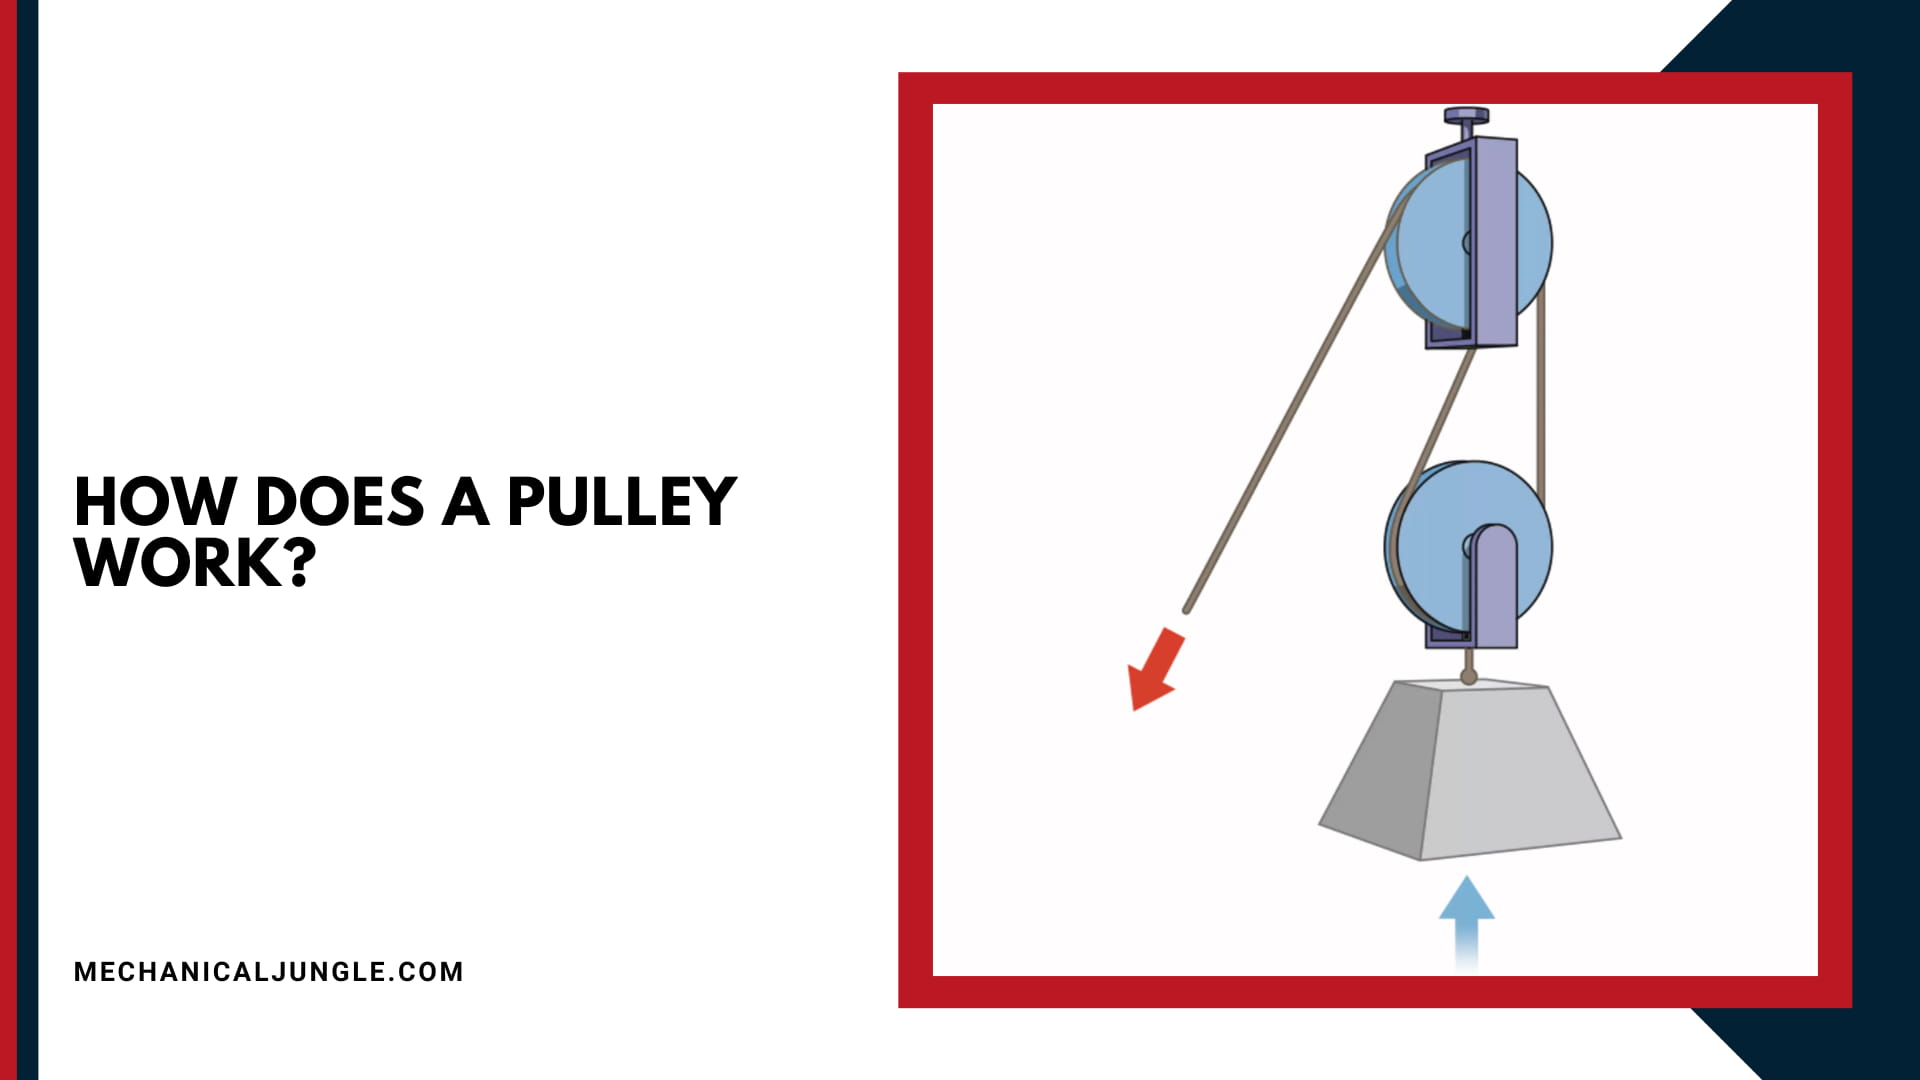 How Does a Pulley Work?